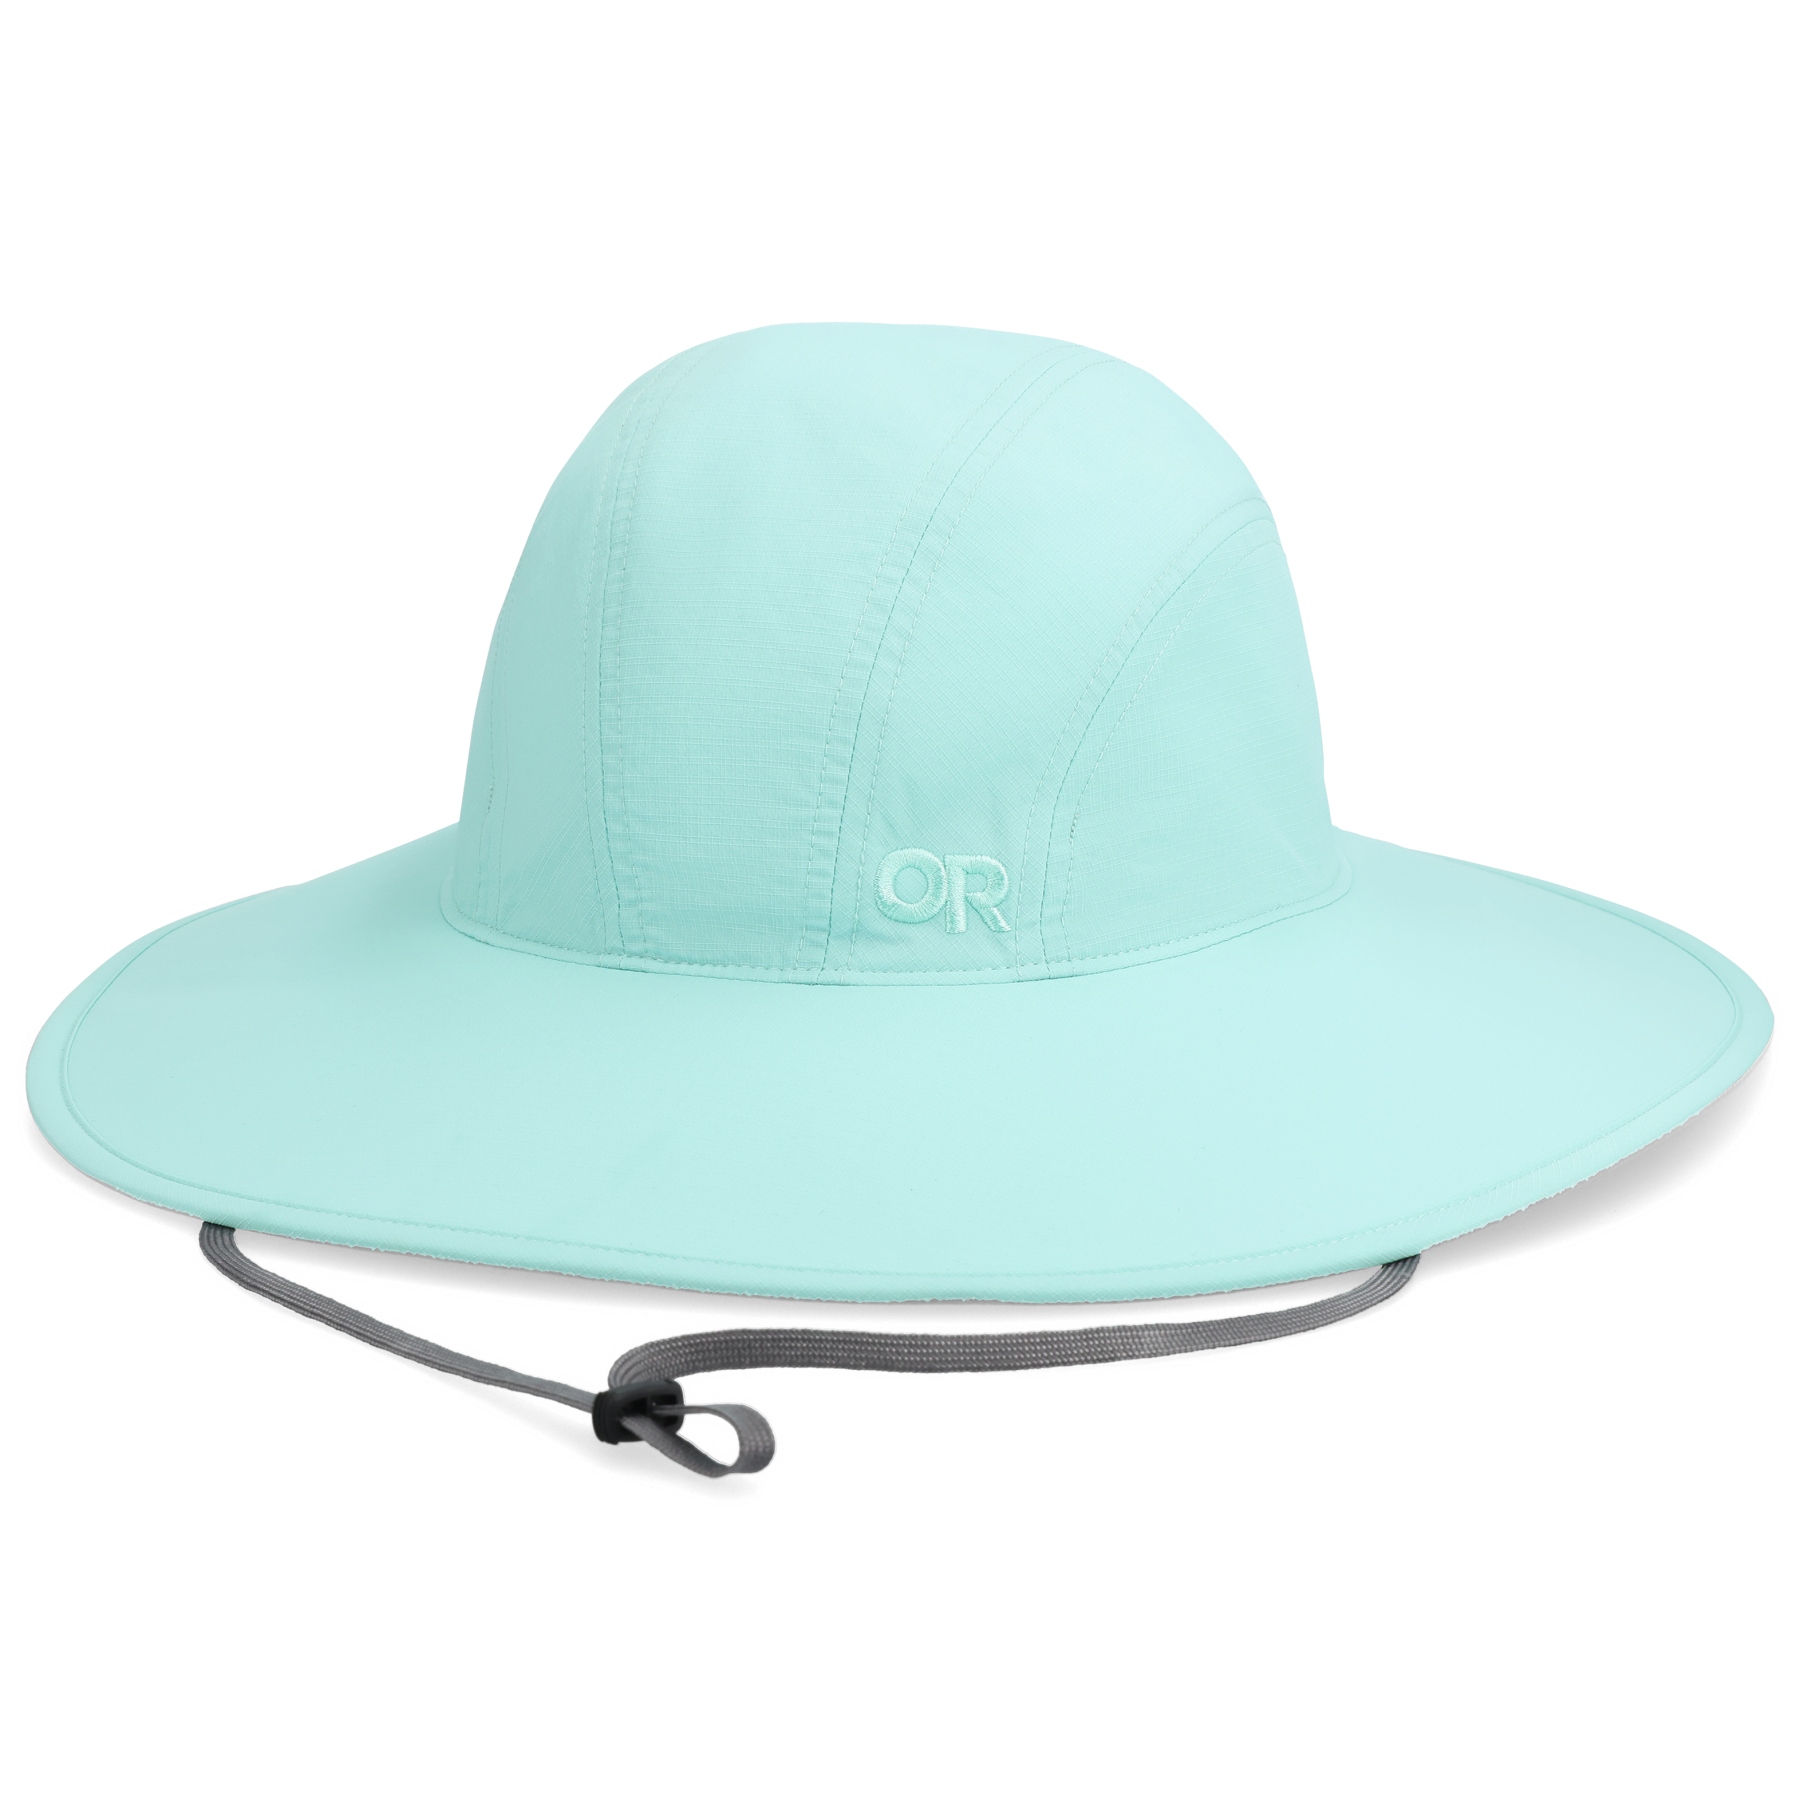 Image of Outdoor Research Women's Oasis Sun Hat - calcite